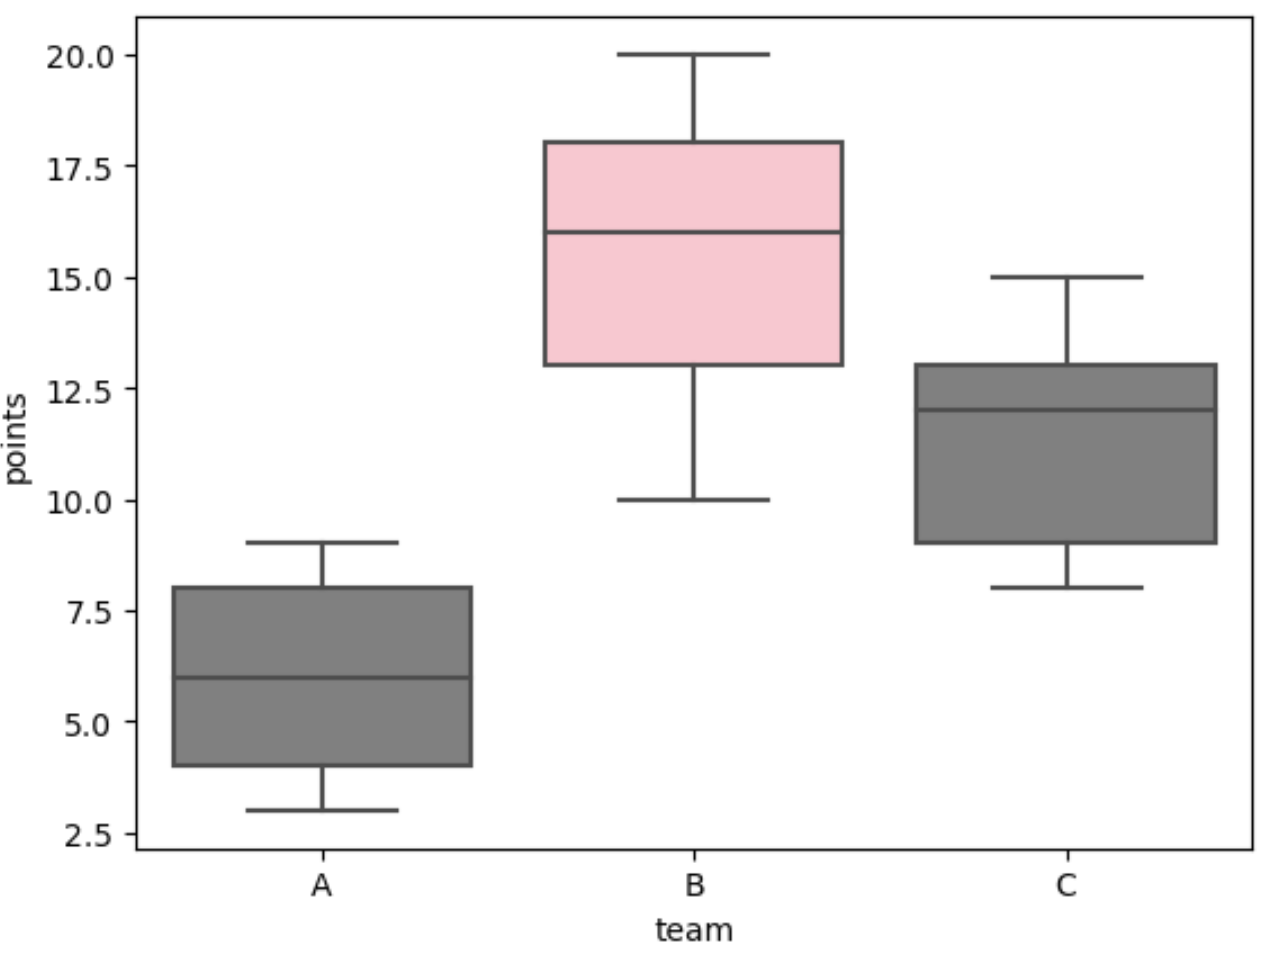 seaborn highlight one group in boxplot